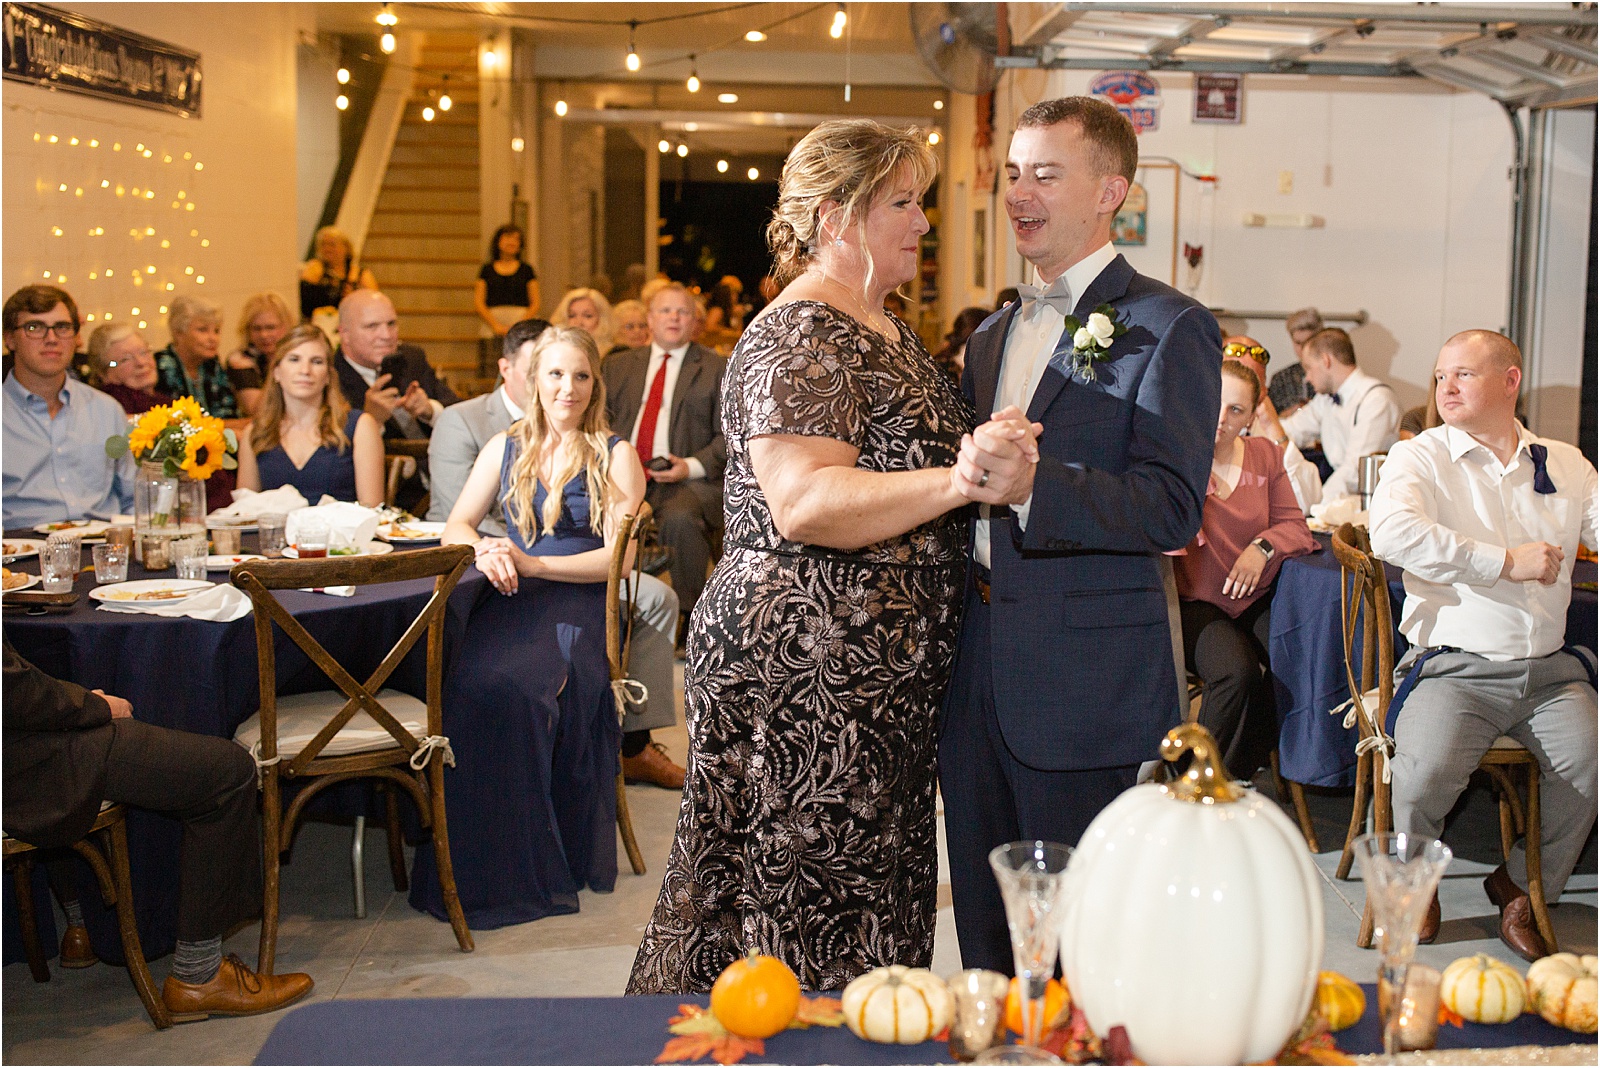 groom dances with his mother at wedding reception decorated with pumpkins